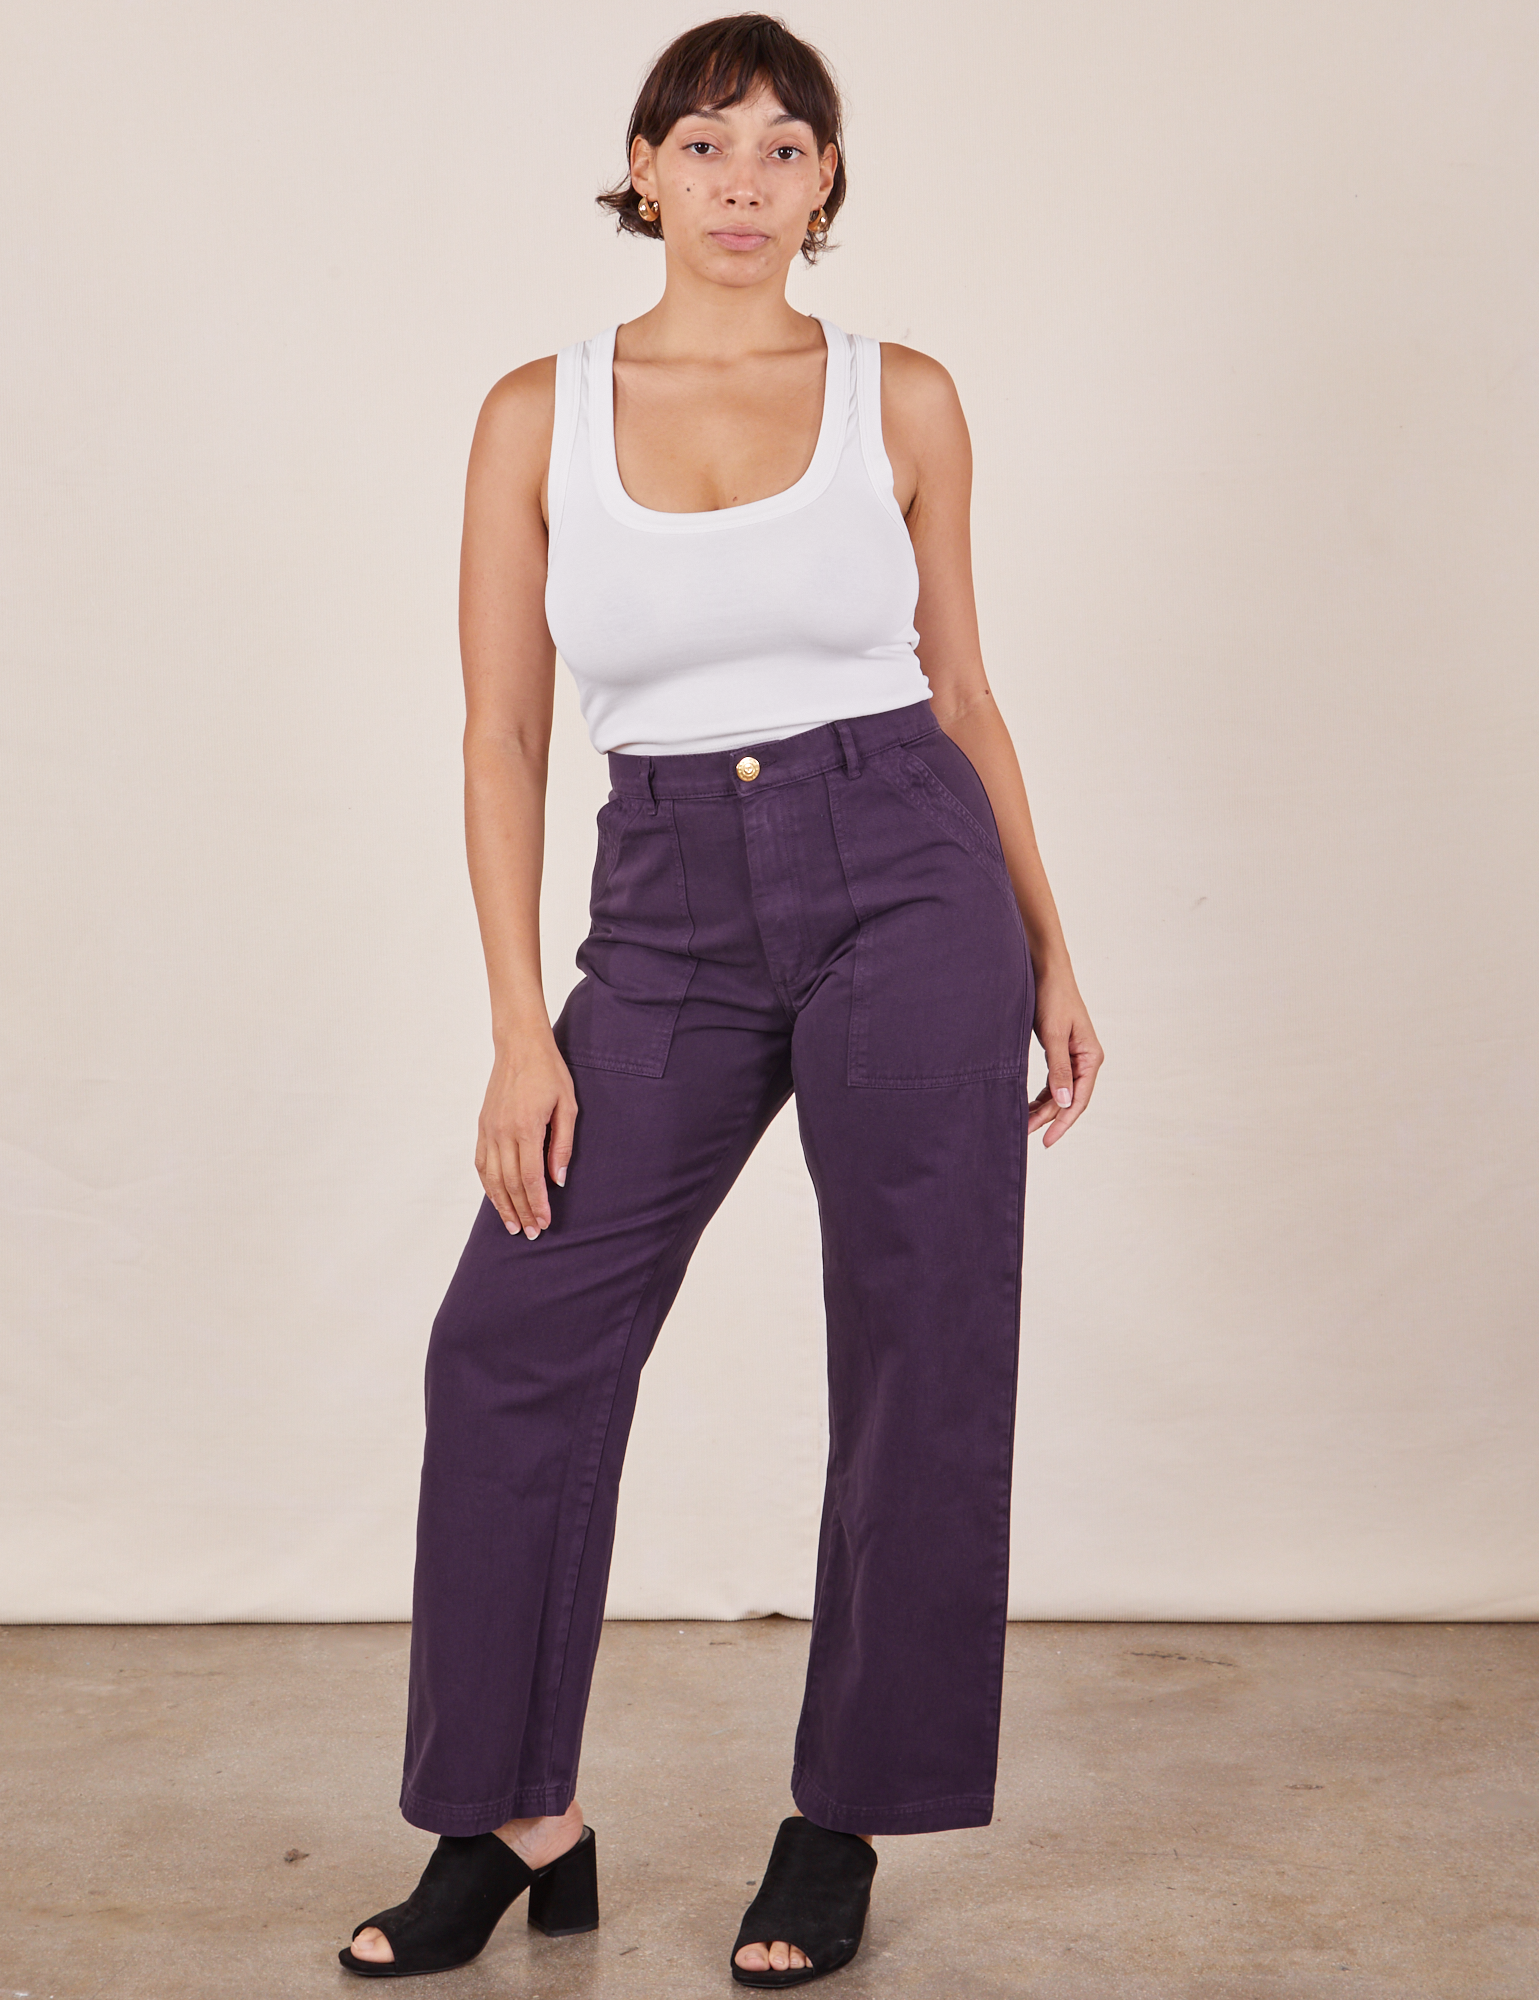 Tiara is 5&#39;4&quot; and wearing S Work Pants in Nebula Purple paired with vintage off-white Tank Top